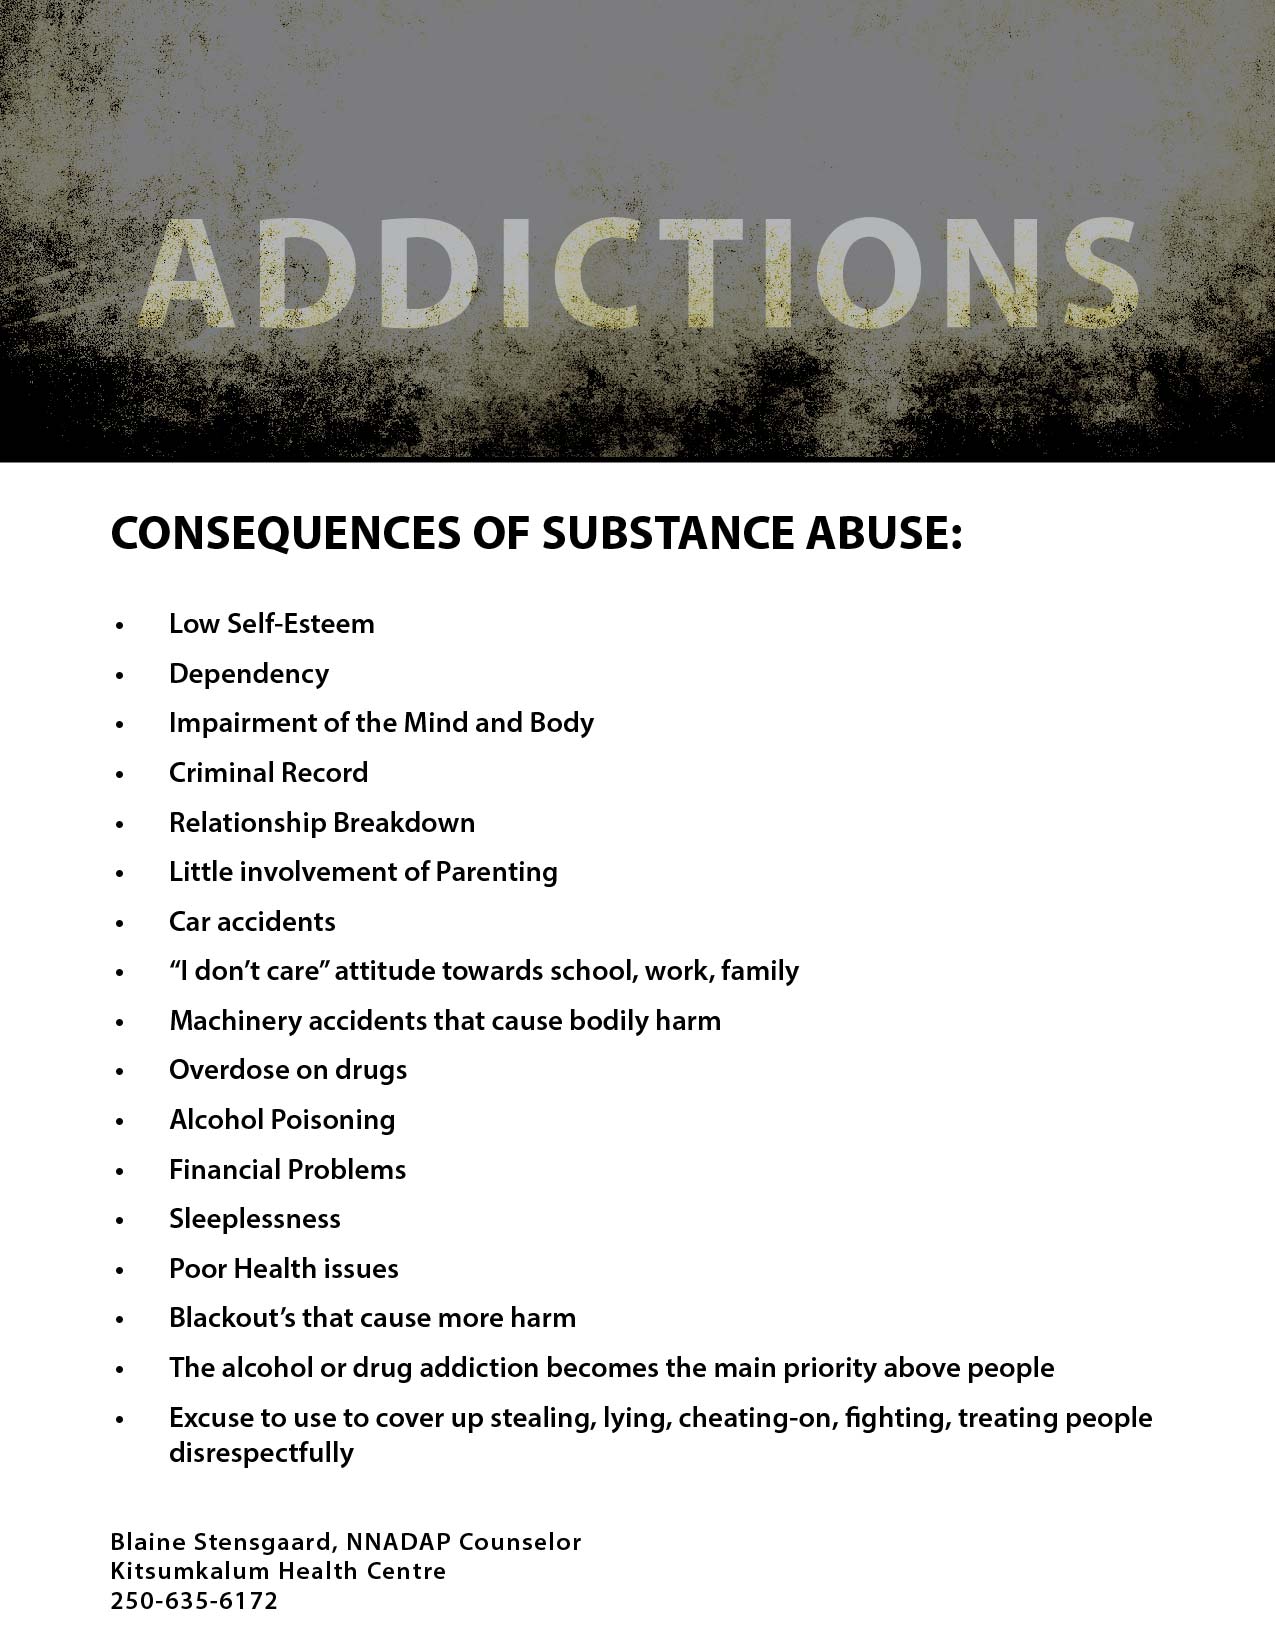 Consequences of Substance Abuse